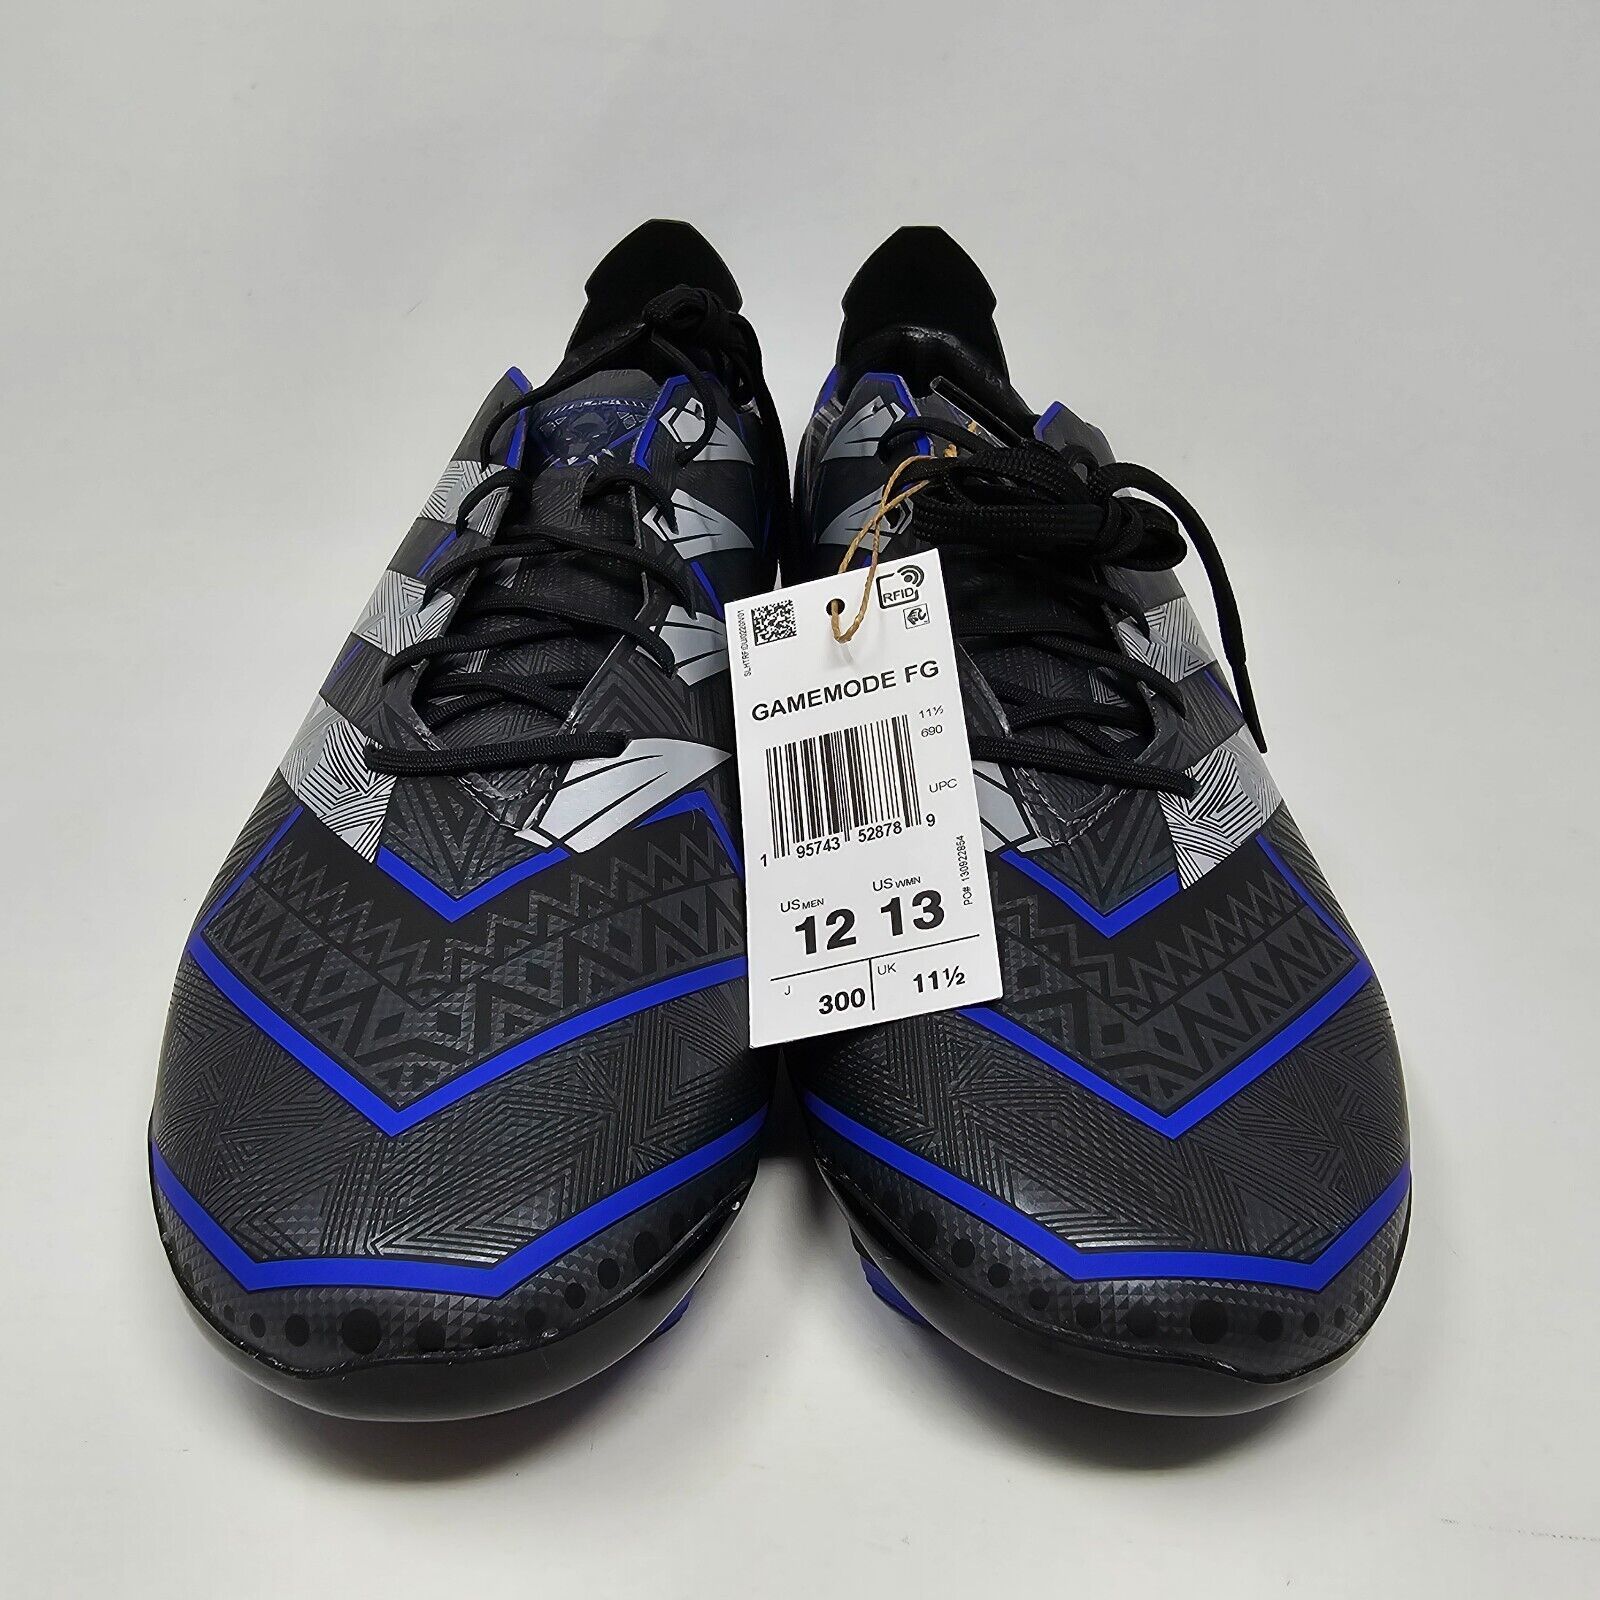 Adidas Game Mode FG Men's Size 12 Soccer Shoe Black Panther Soccer Cleats #847 - $53.84